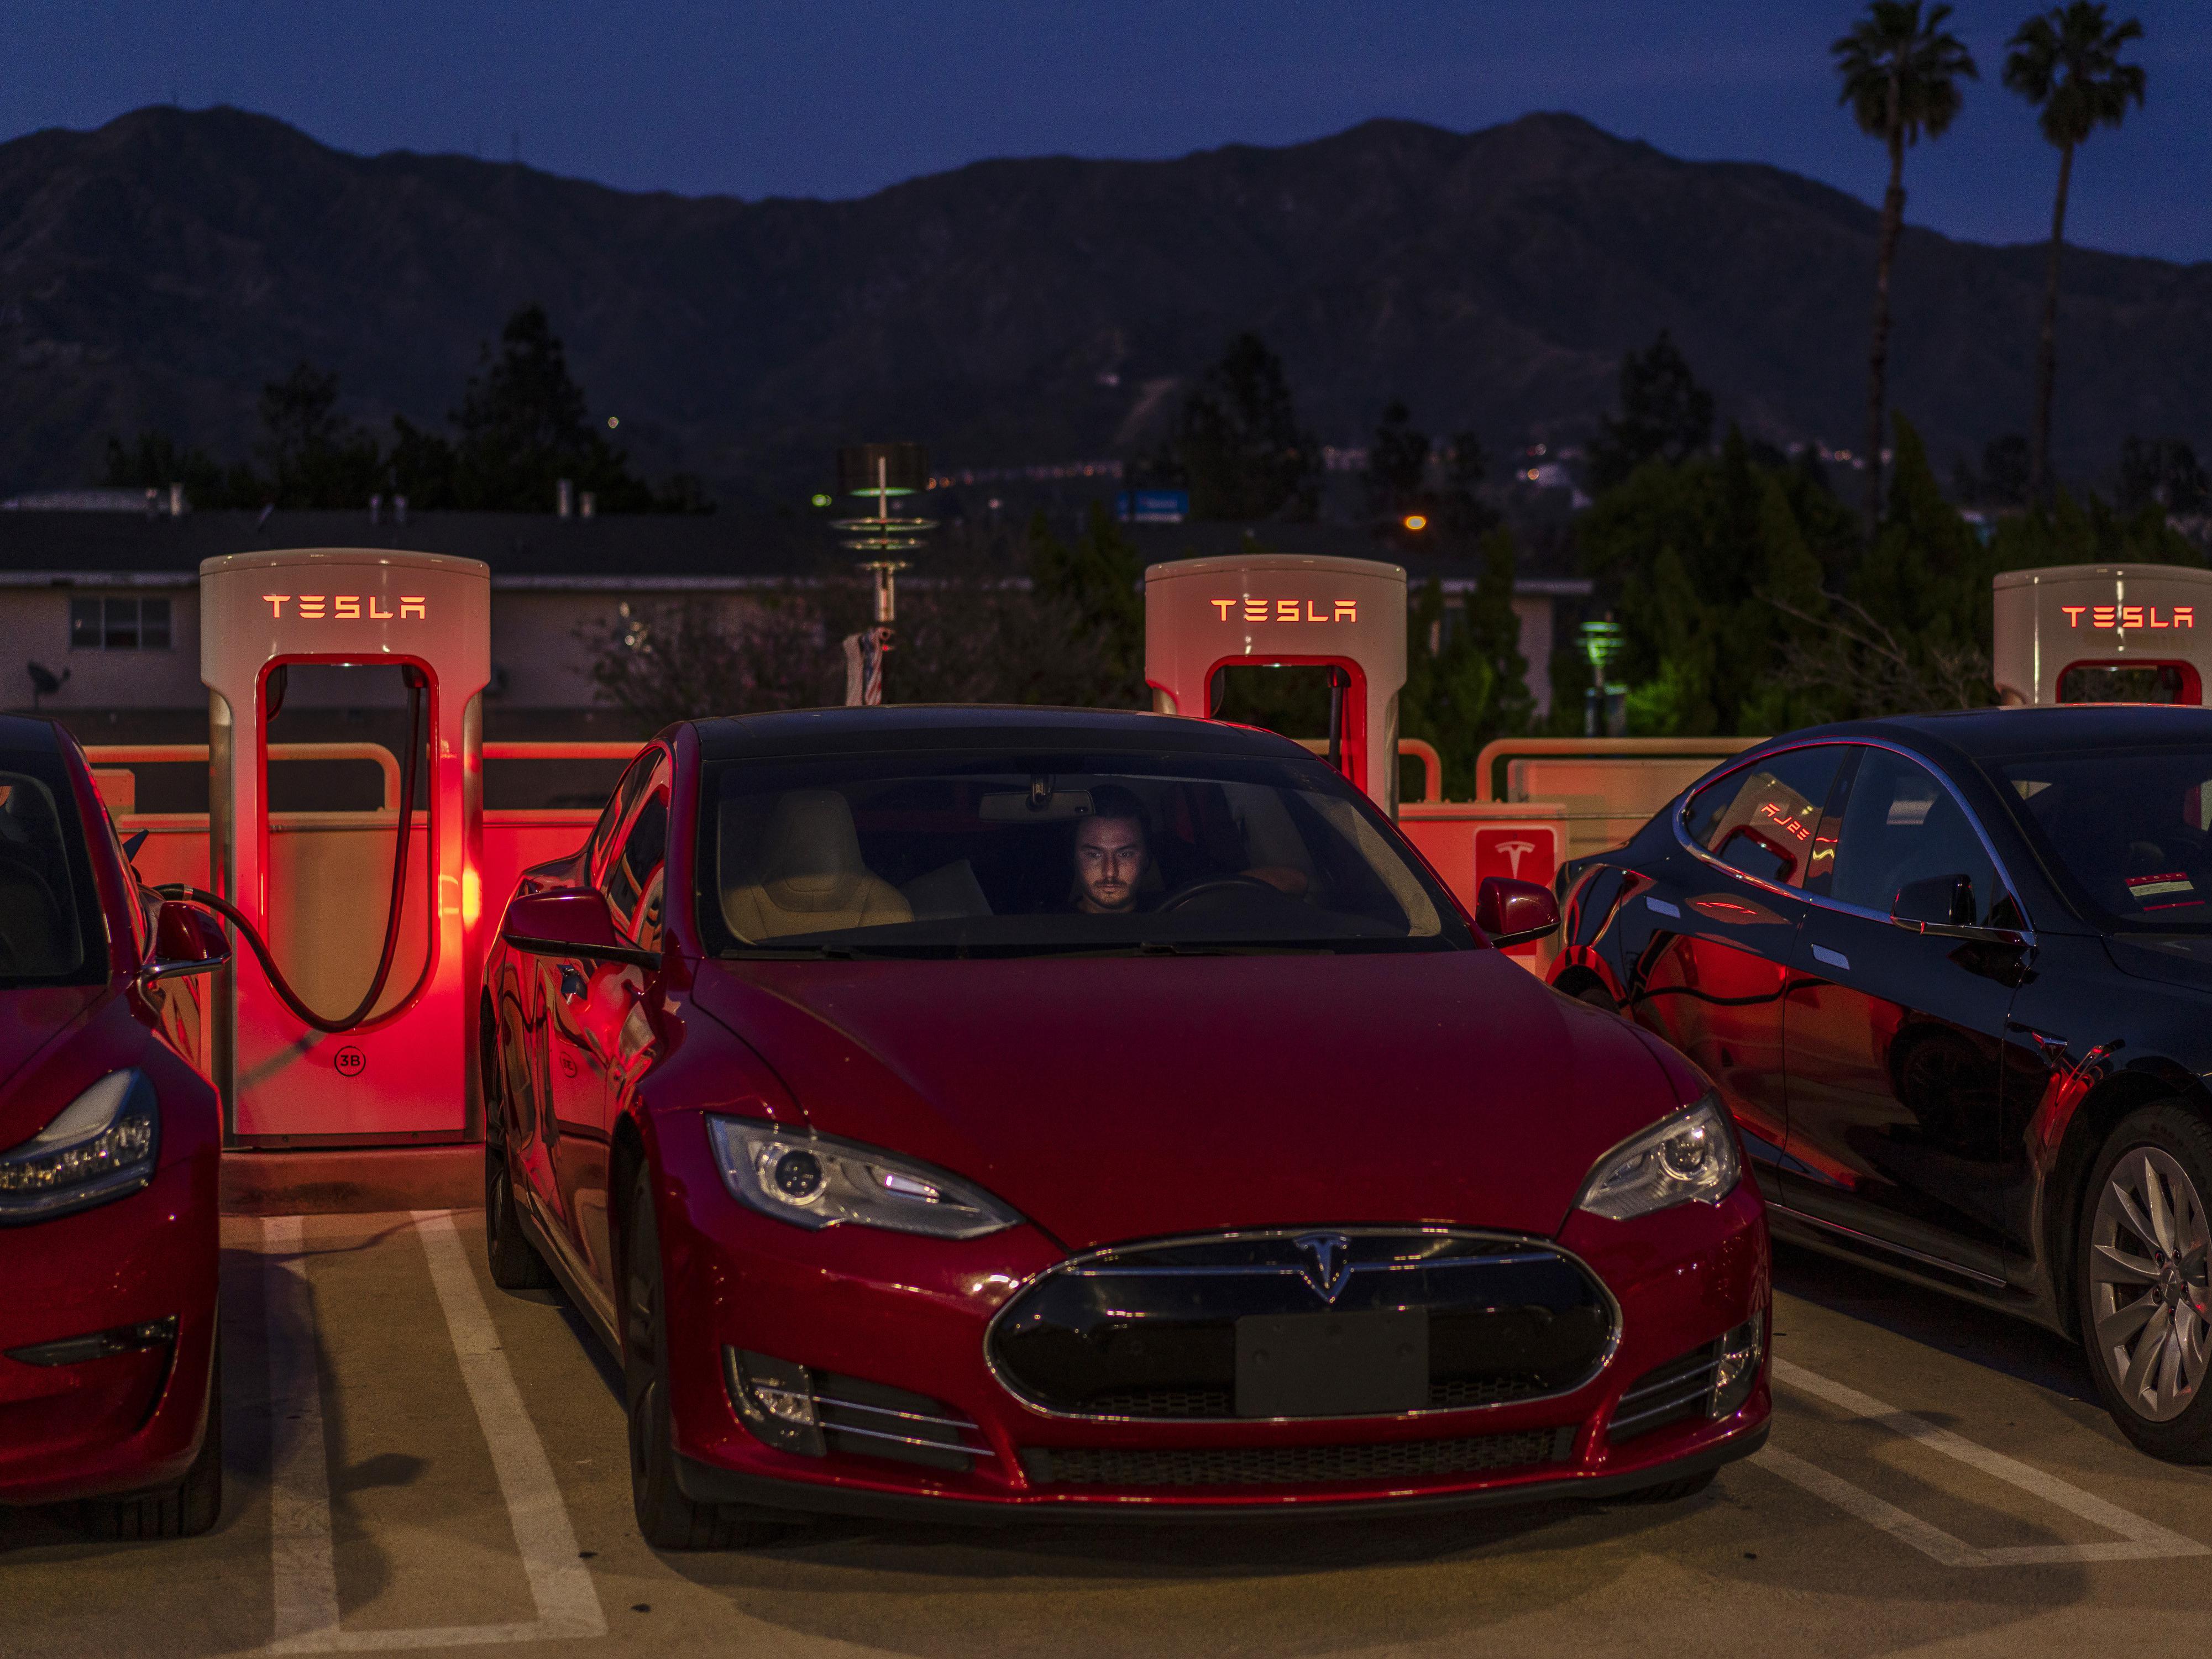 Who Actually Owns Tesla's Data? - IEEE Spectrum